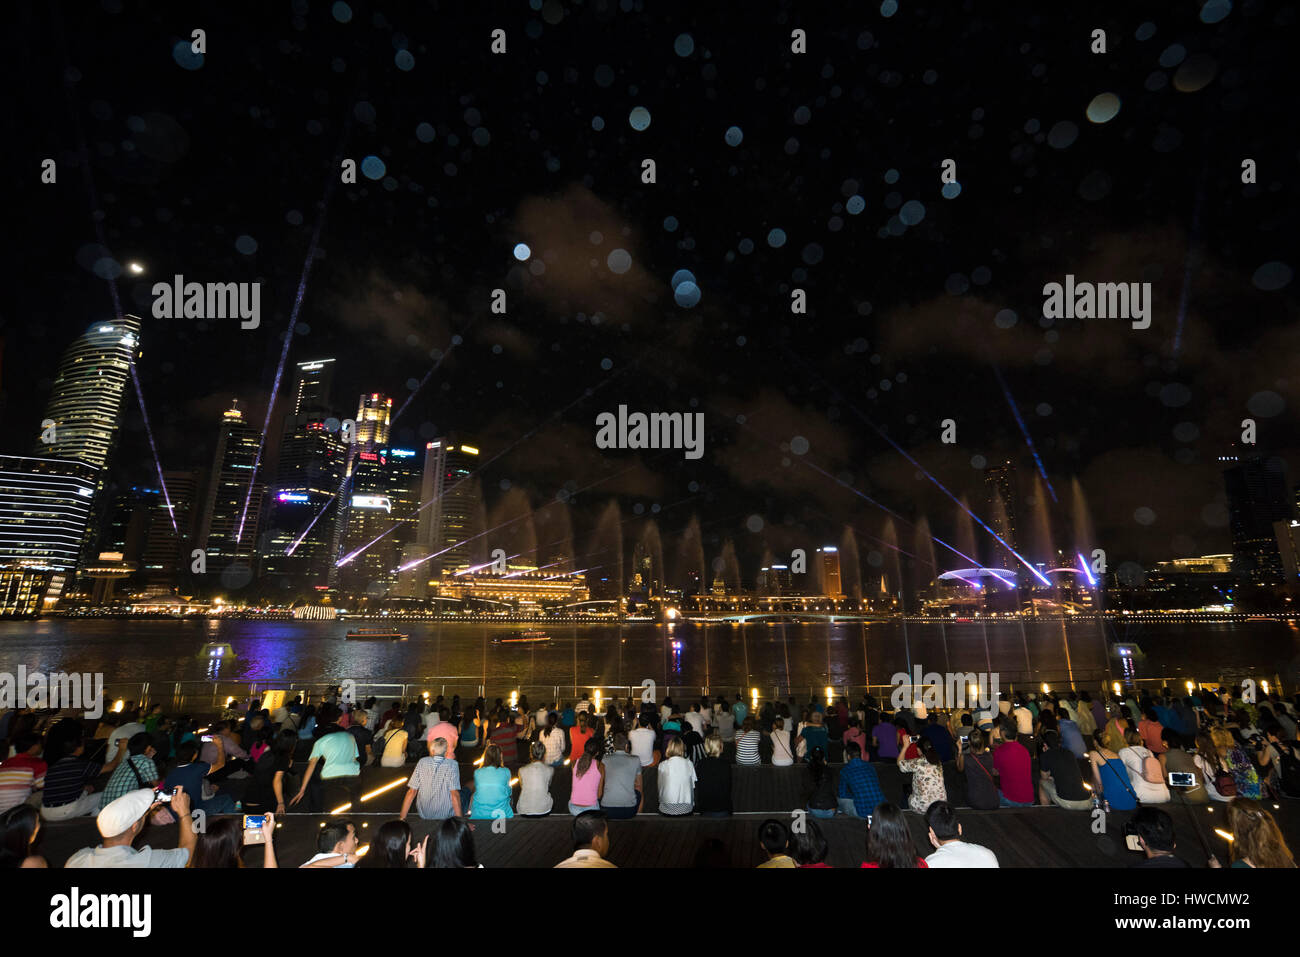 Horizontal view of the audience watching the Wonder Full light and sound show at night in Singapore. Stock Photo